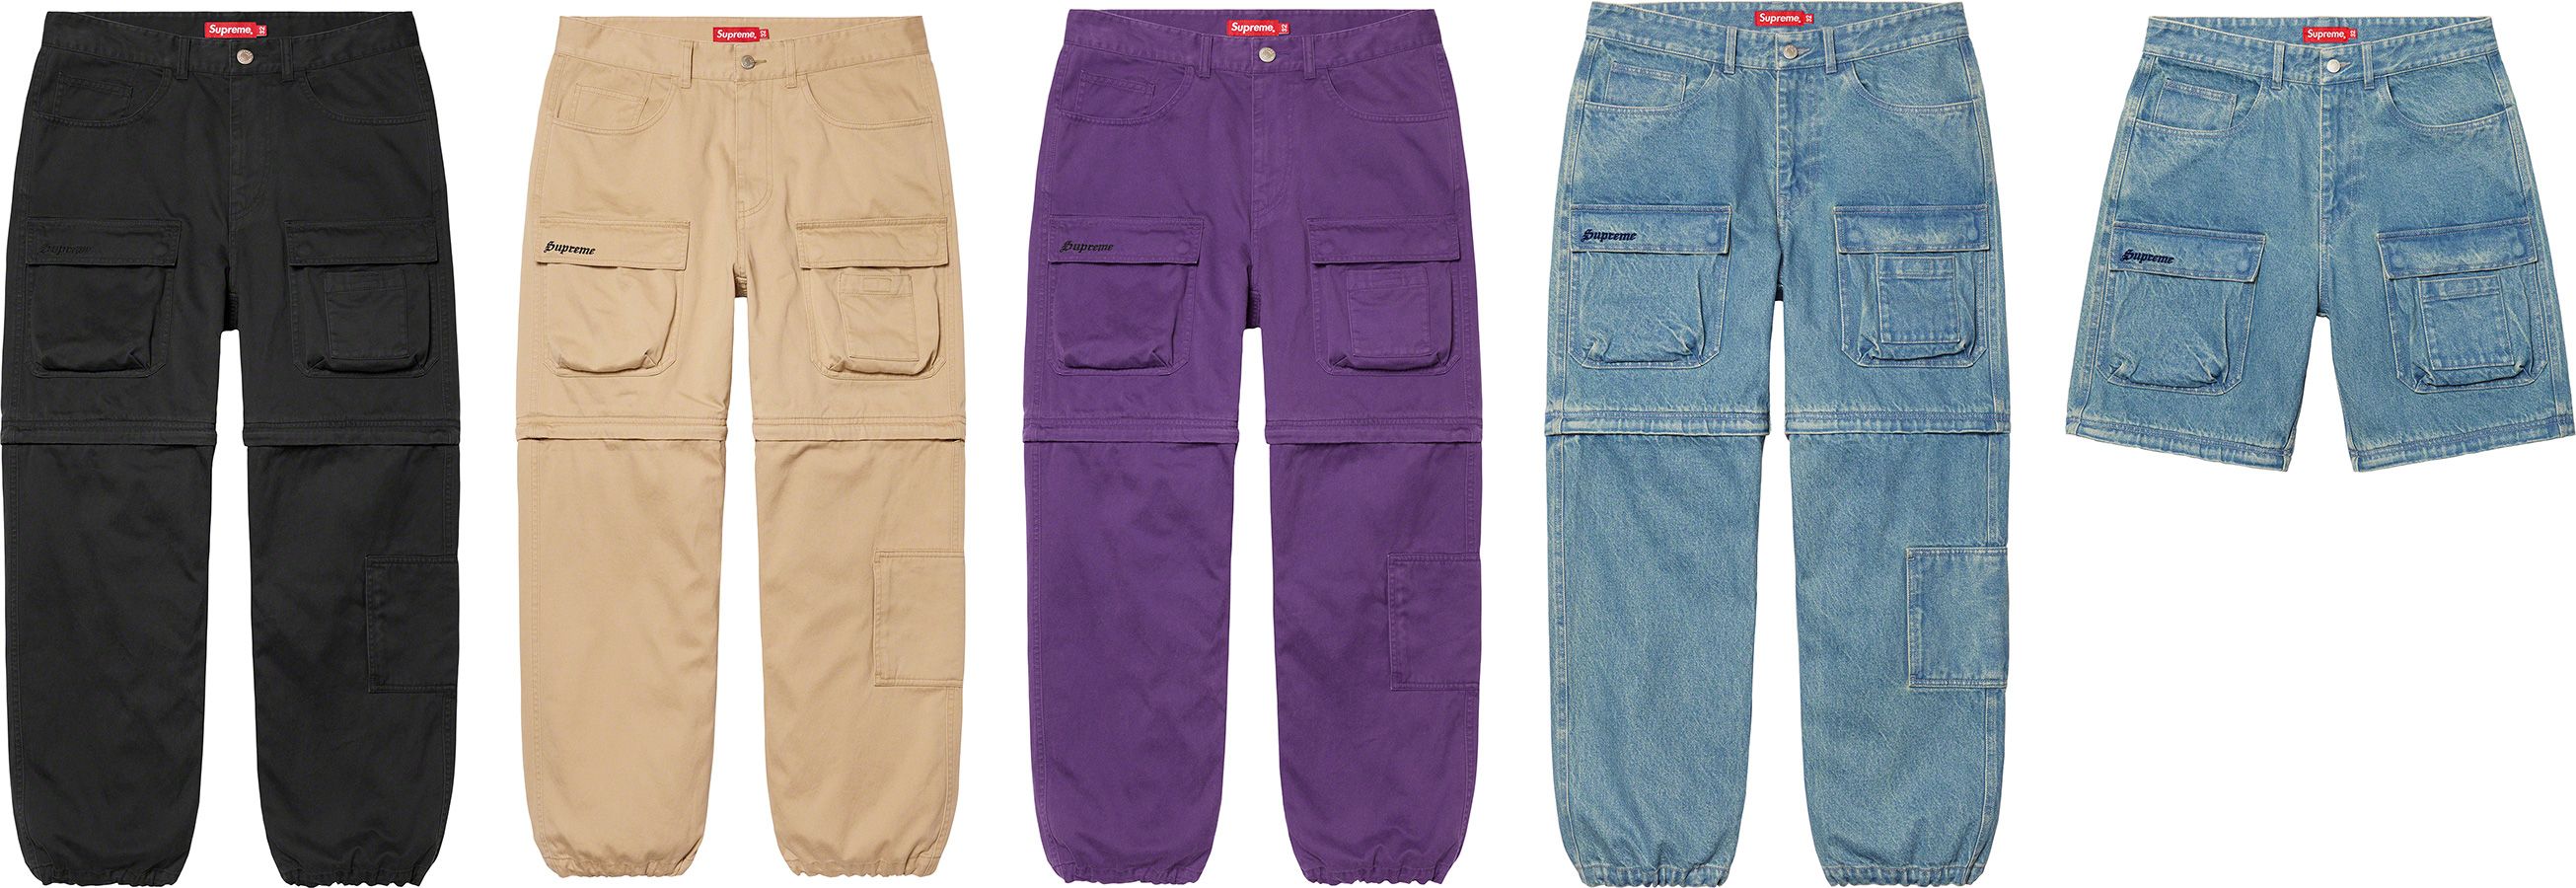 Zip-Off Utility Pant - Fall/Winter 2021 Preview – Supreme